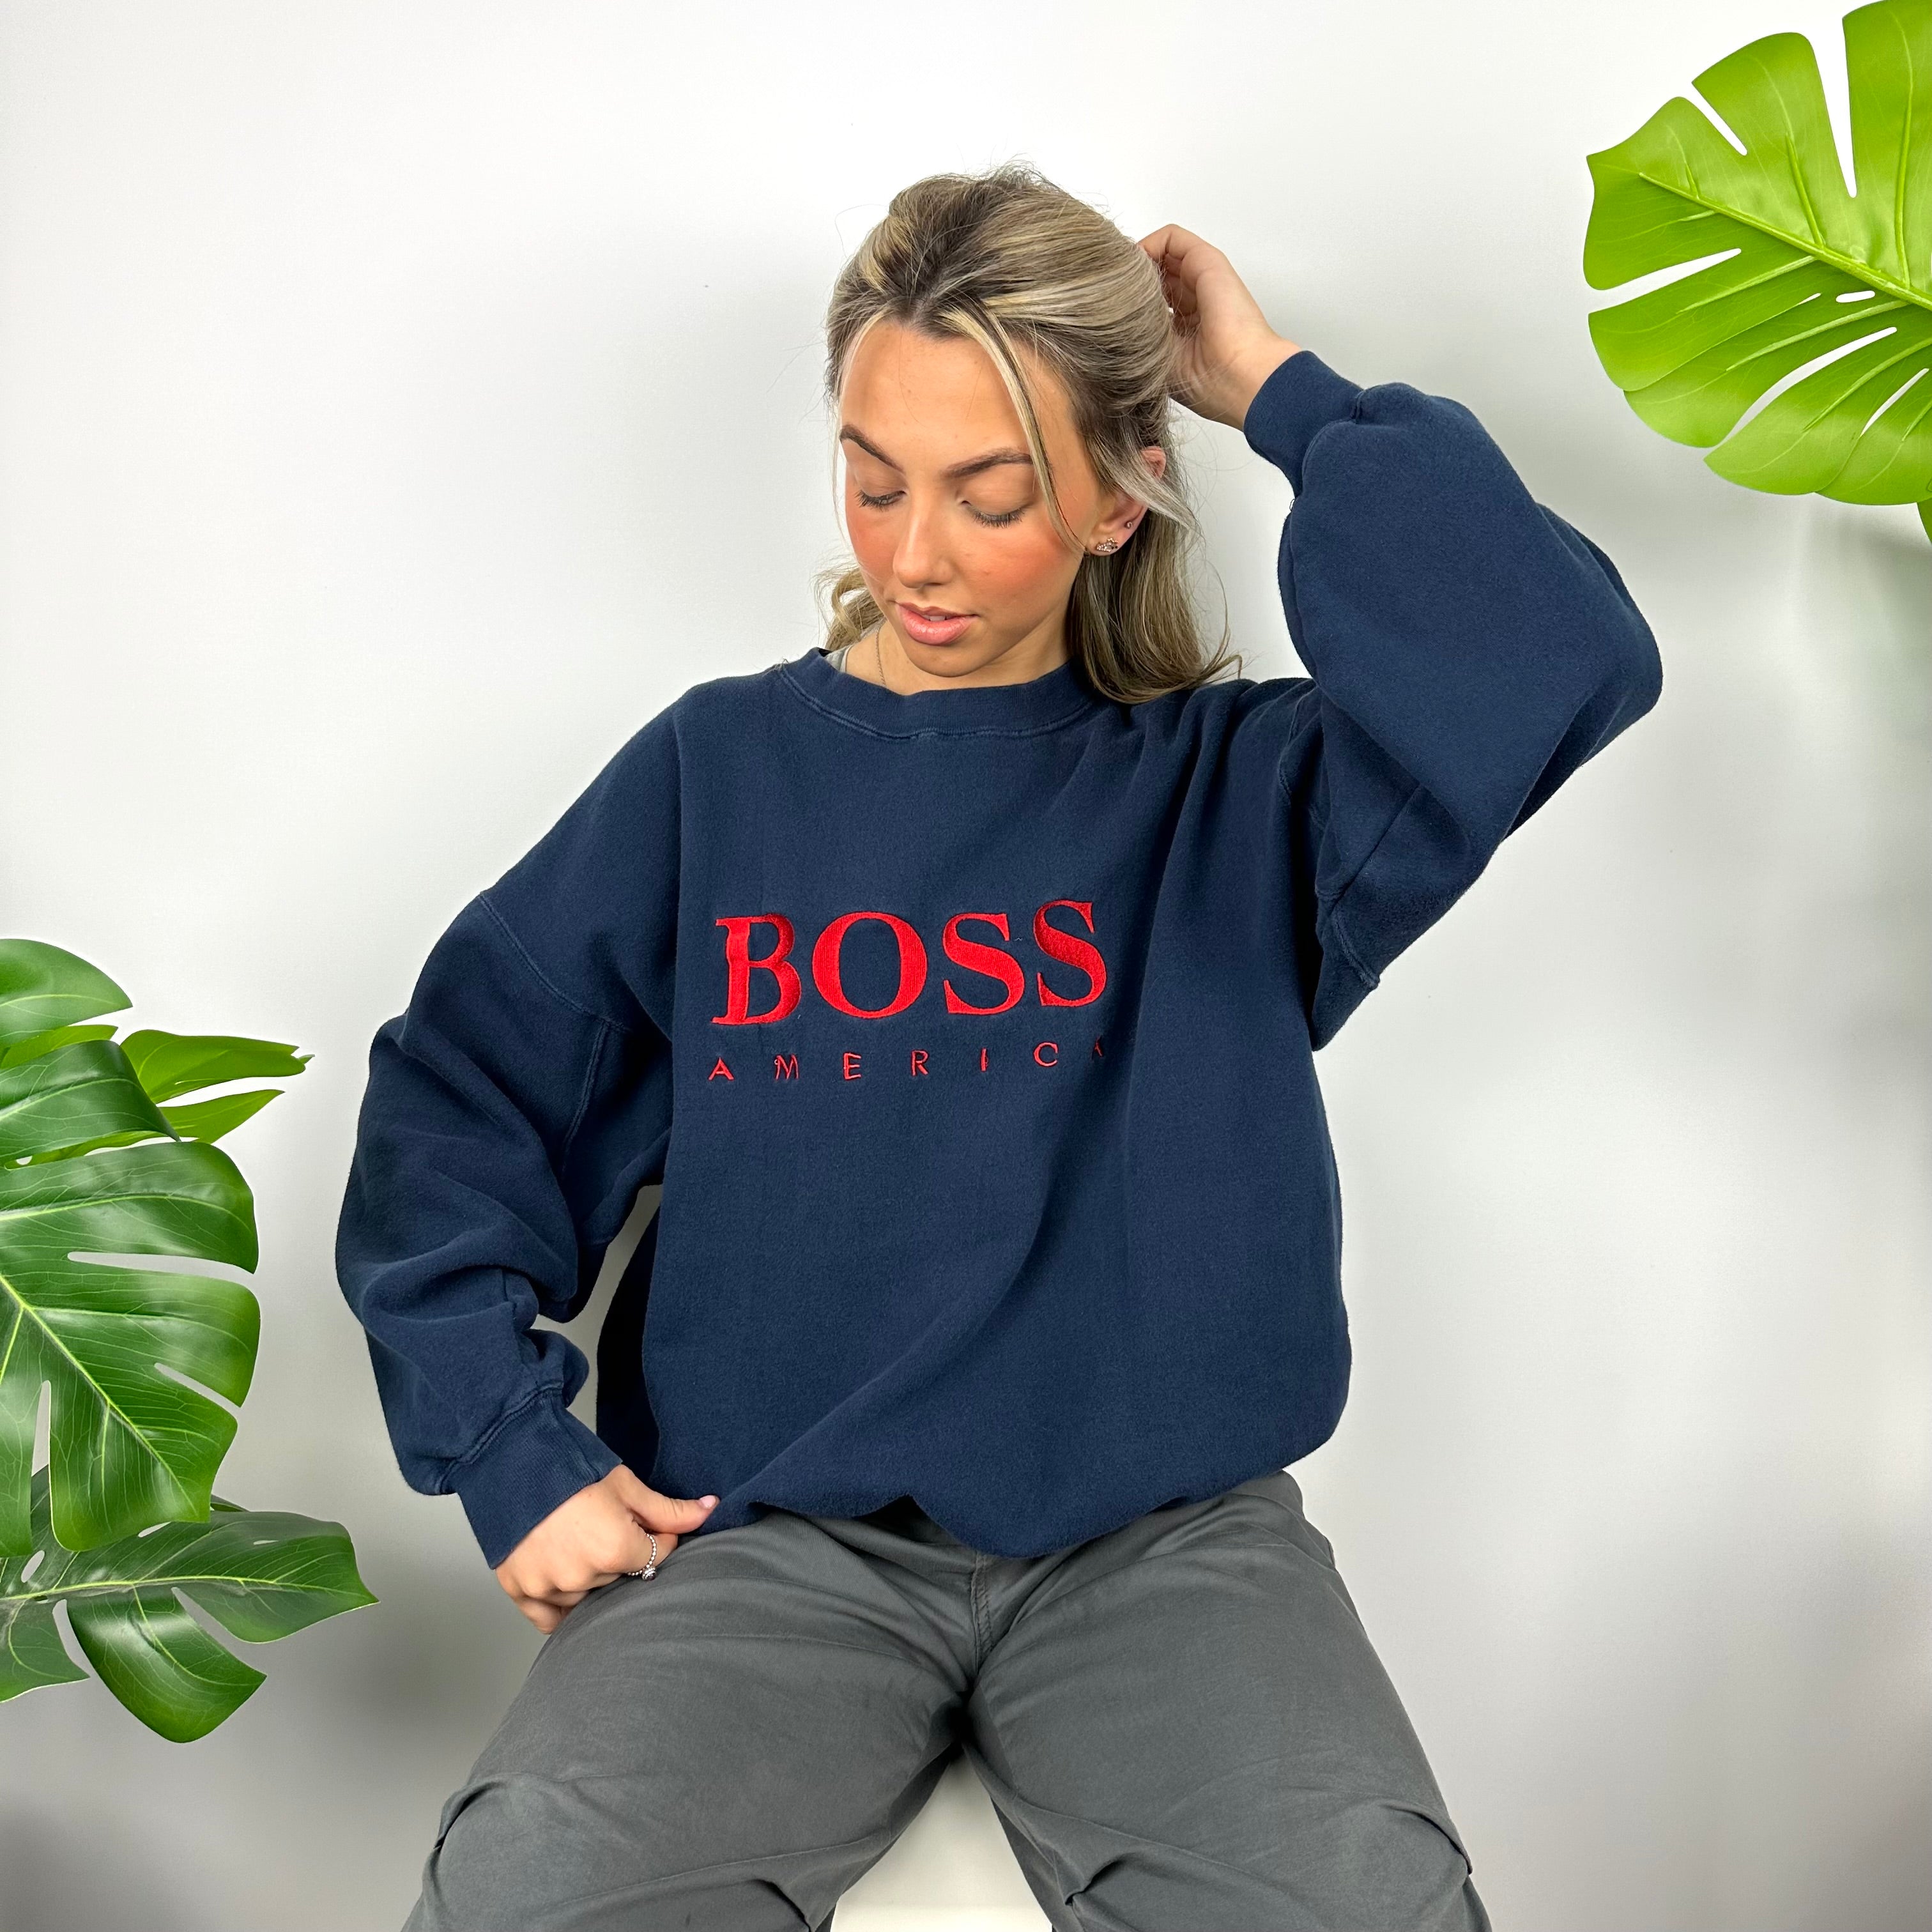 Boss America Navy Embroidered Spell Out Sweatshirt (M)